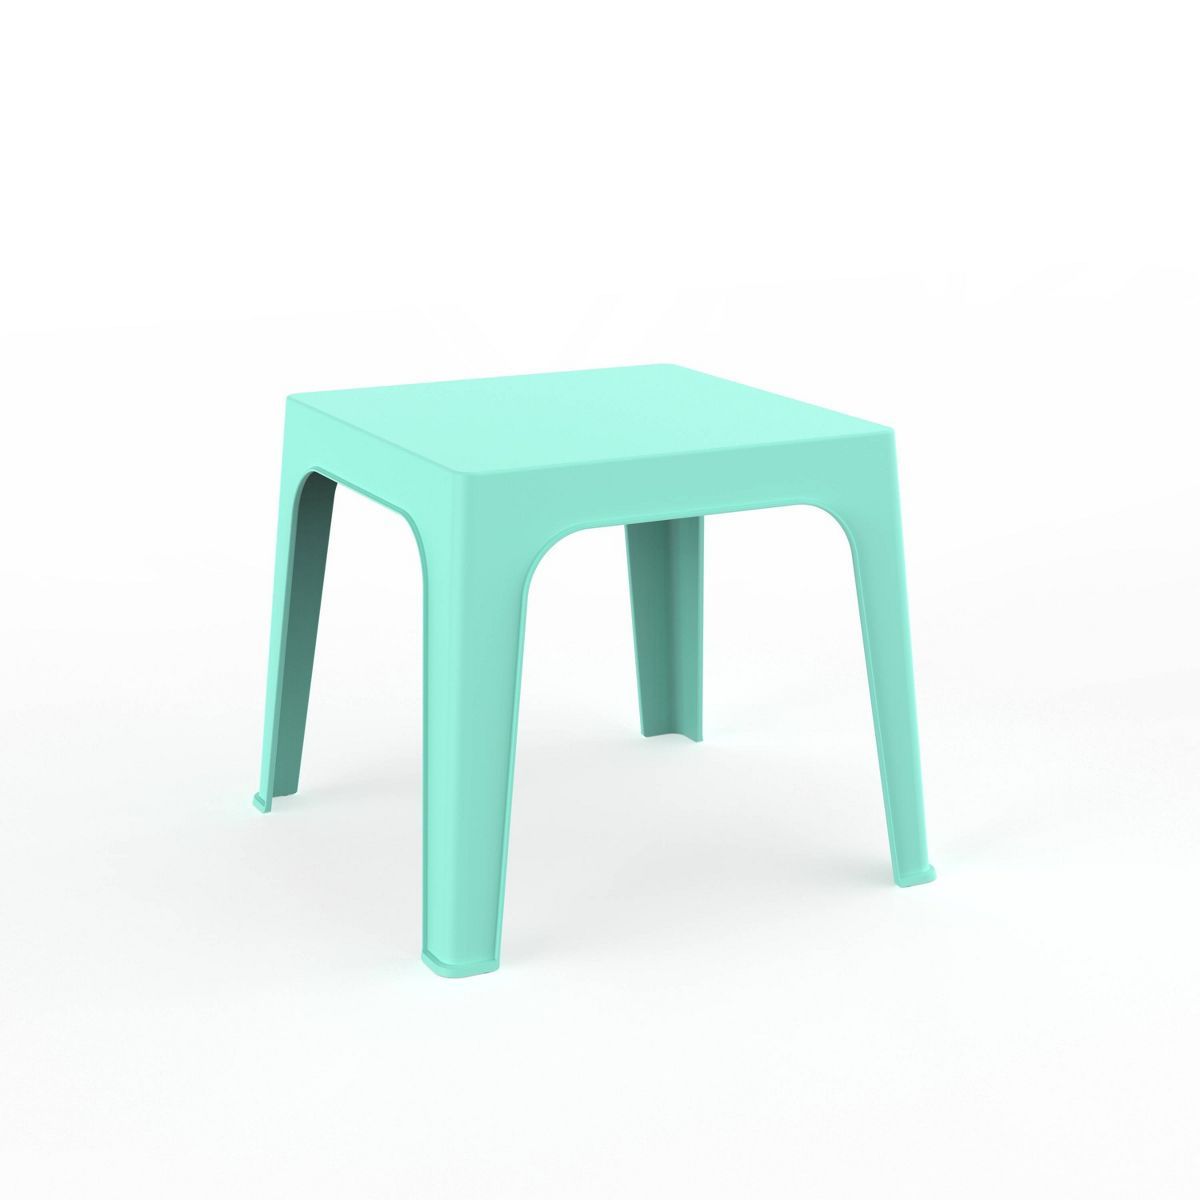 RESOL Square Julieta Kids Table Patio Accent Tables Green | Target